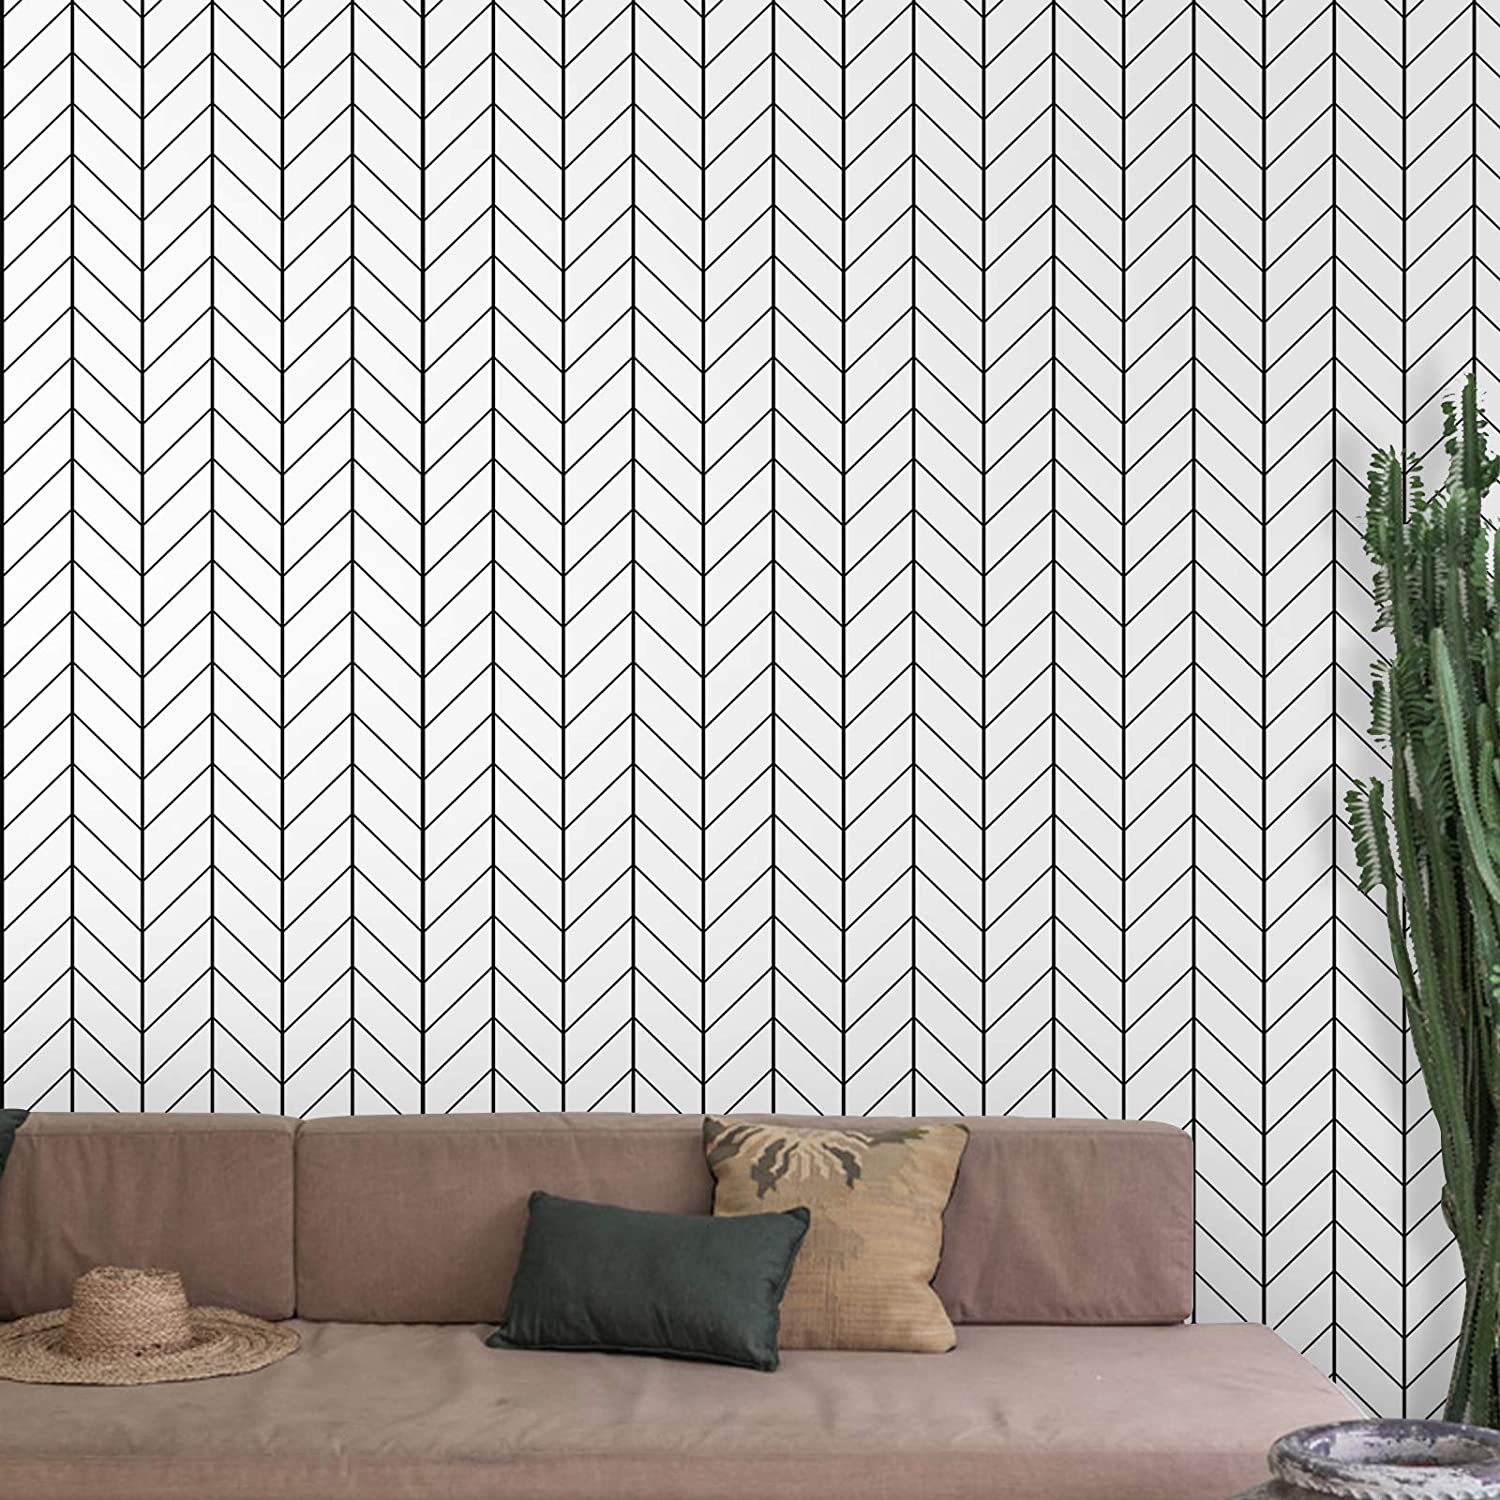 Black And White Striped Removable Wallpapers